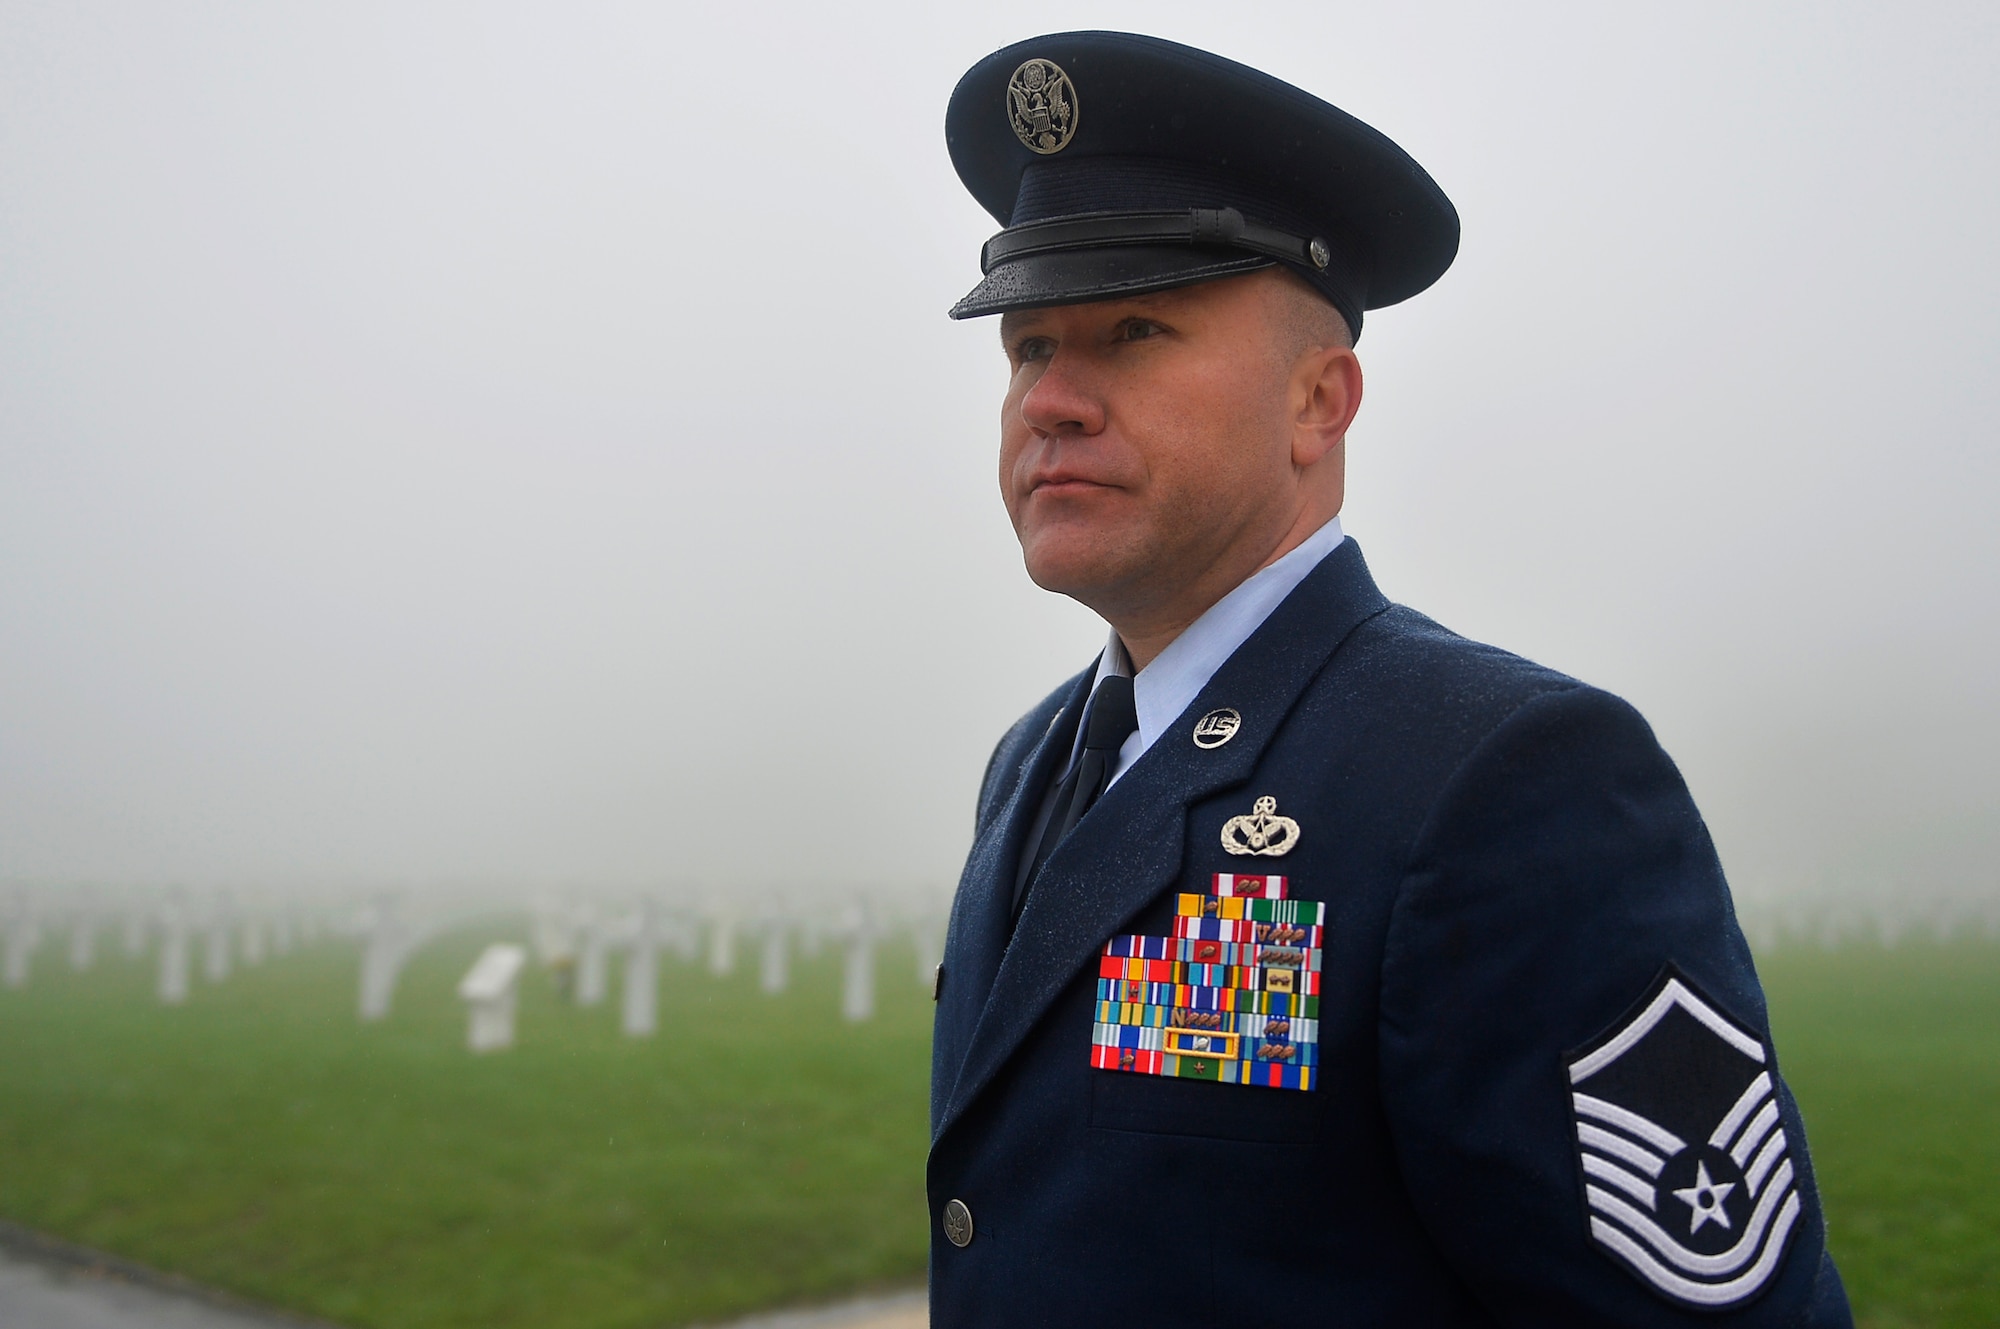 U.S. Air Force Master Sgt. Michael Murieen, 786th Civil Engineer Squadron water and fuel systems maintenance section chief, visits Henri-Chapelle American Cemetery and Memorial, Belgium, Nov. 11, 2017. Veterans Day in the U.S. originated from Armistice Day, which commemorates the end of World War I. (U.S. Air Force photo by Airman 1st Class Joshua Magbanua)